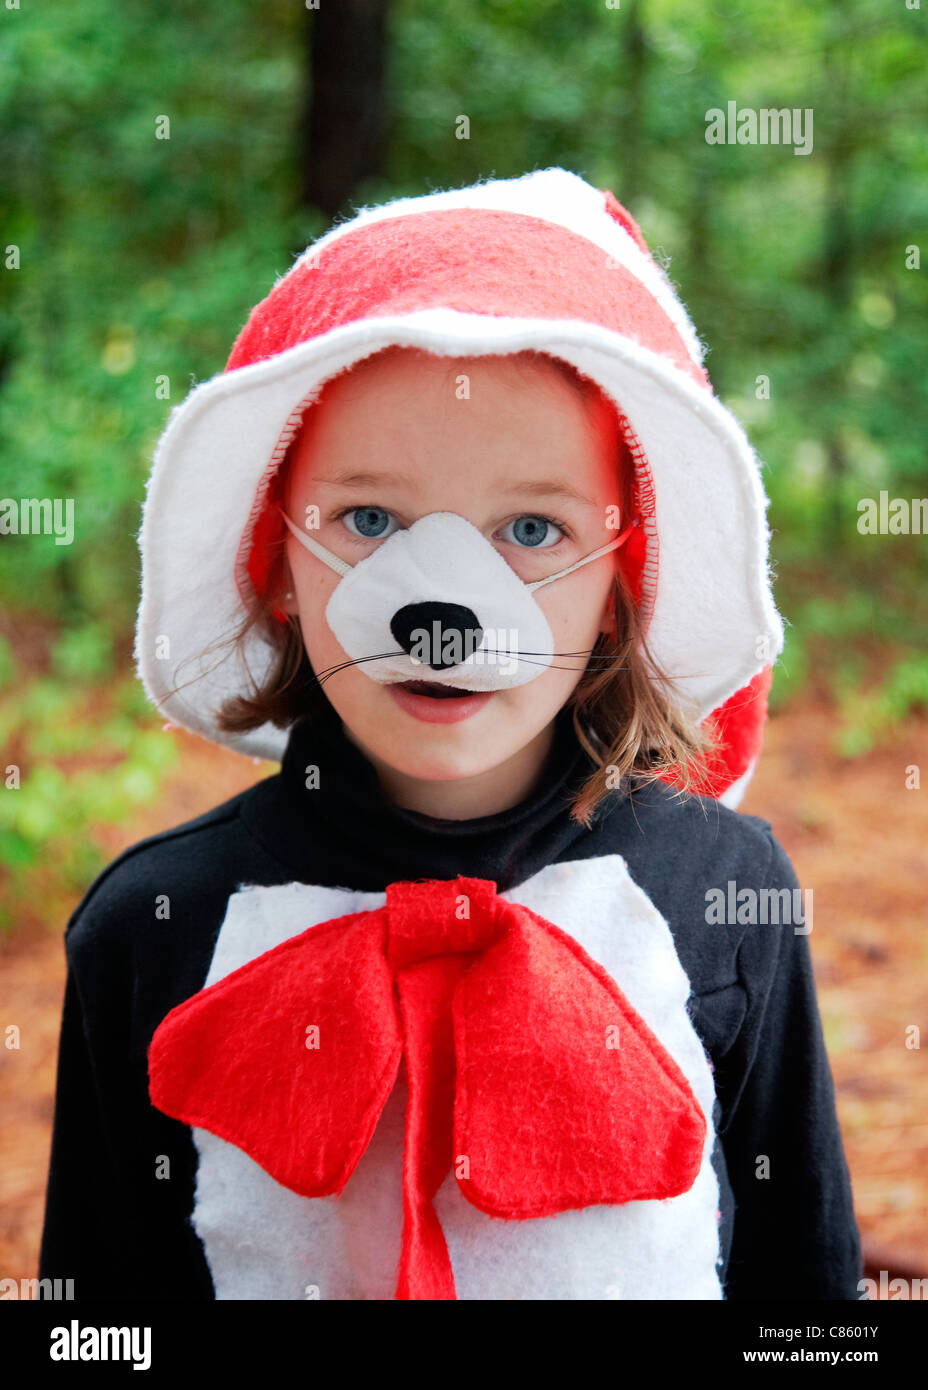 Girl dressed as cat in the hat Stock Photo